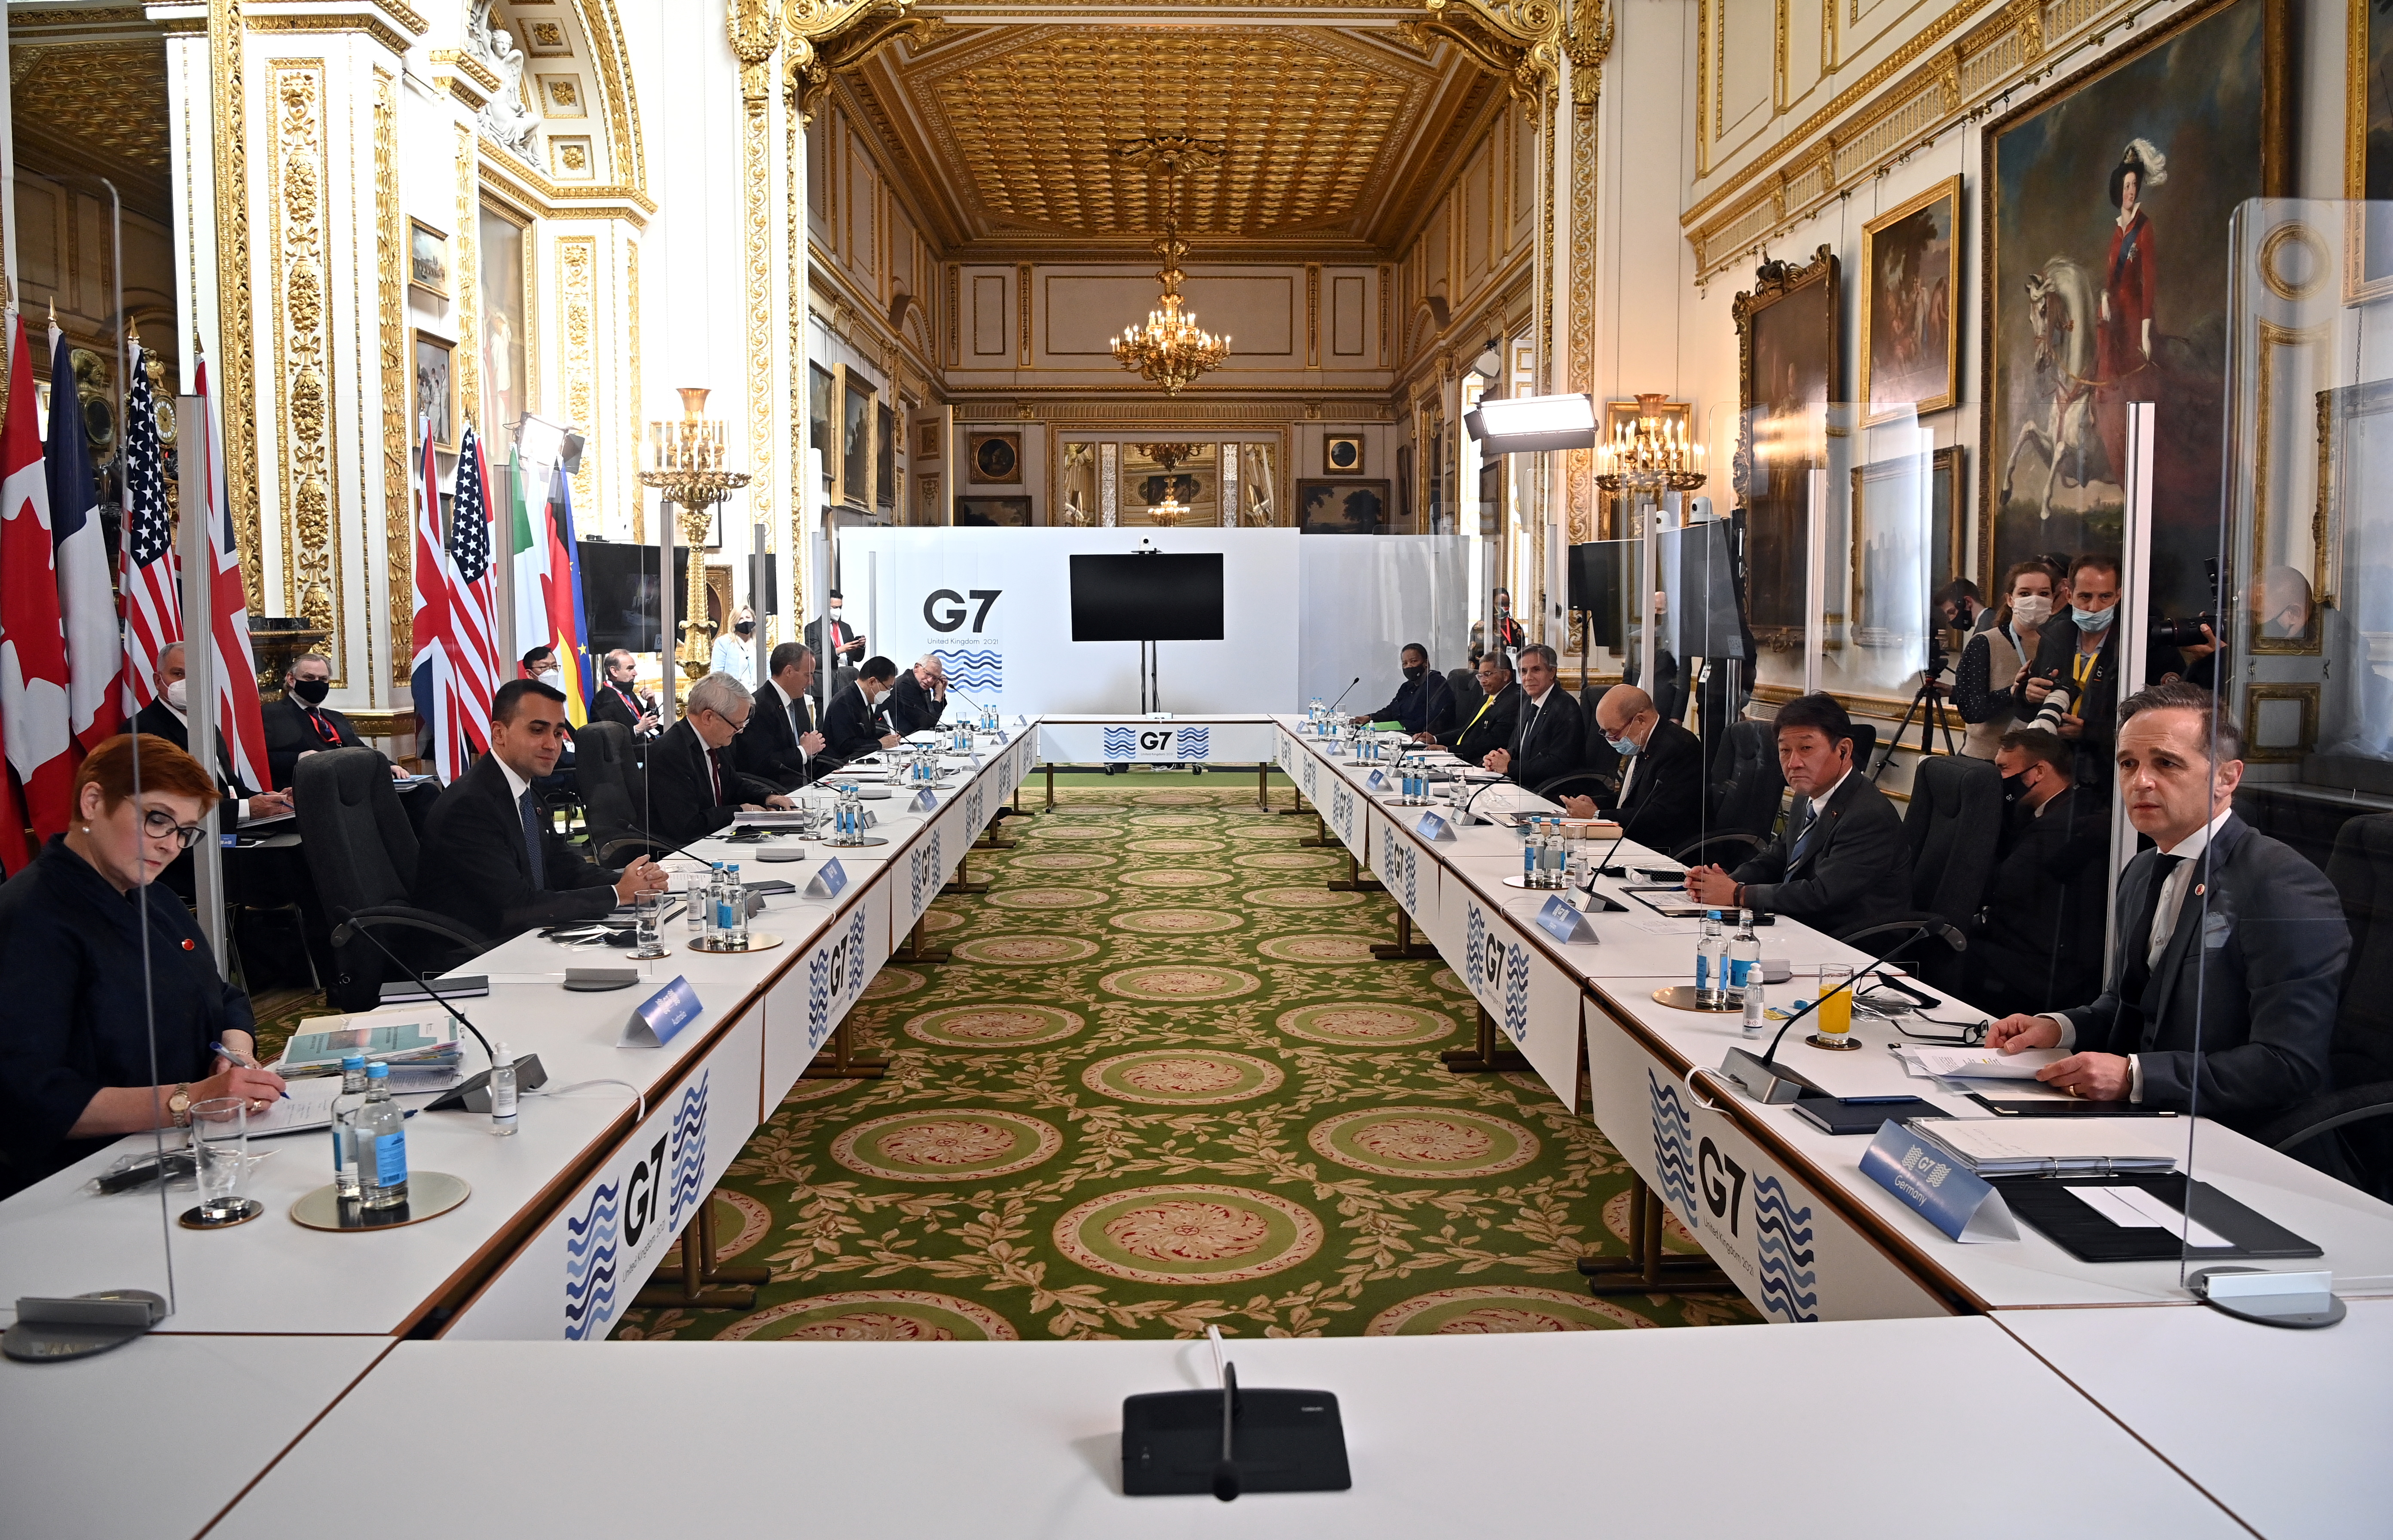 G7 foreign ministers meeting in London